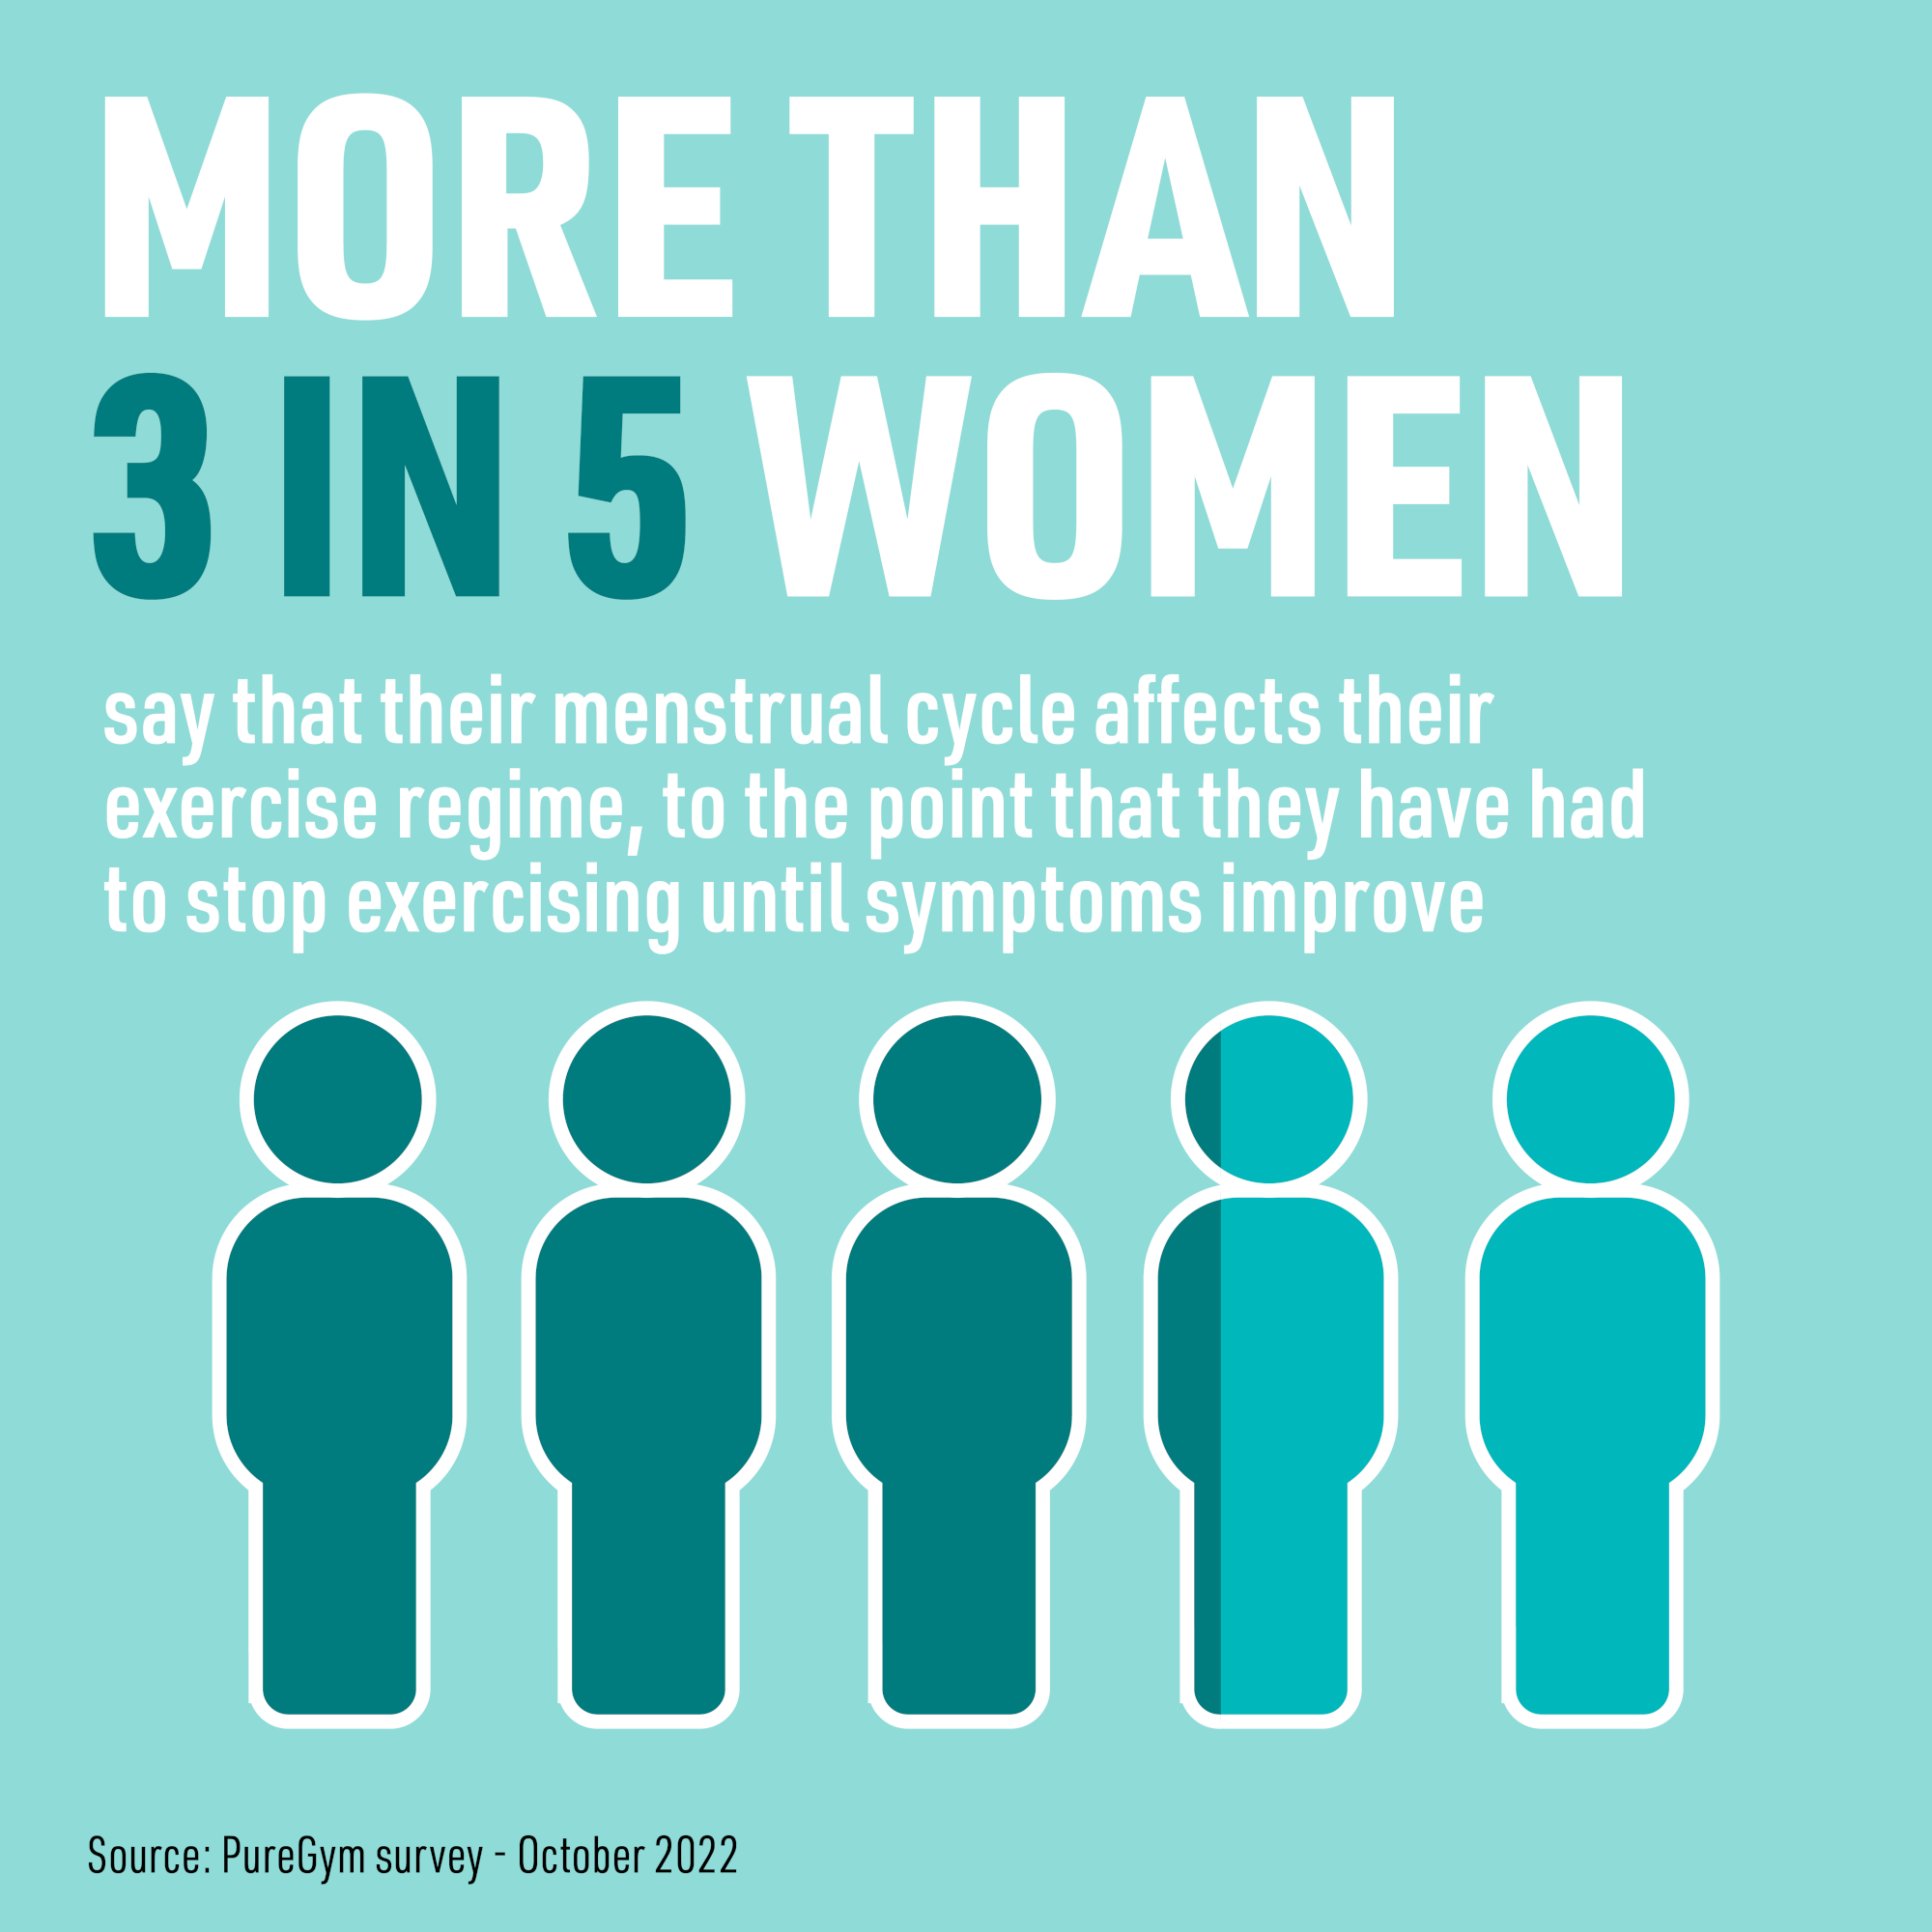 More than 3 in 5 women say that their menstrual cycle affects their exercise routine